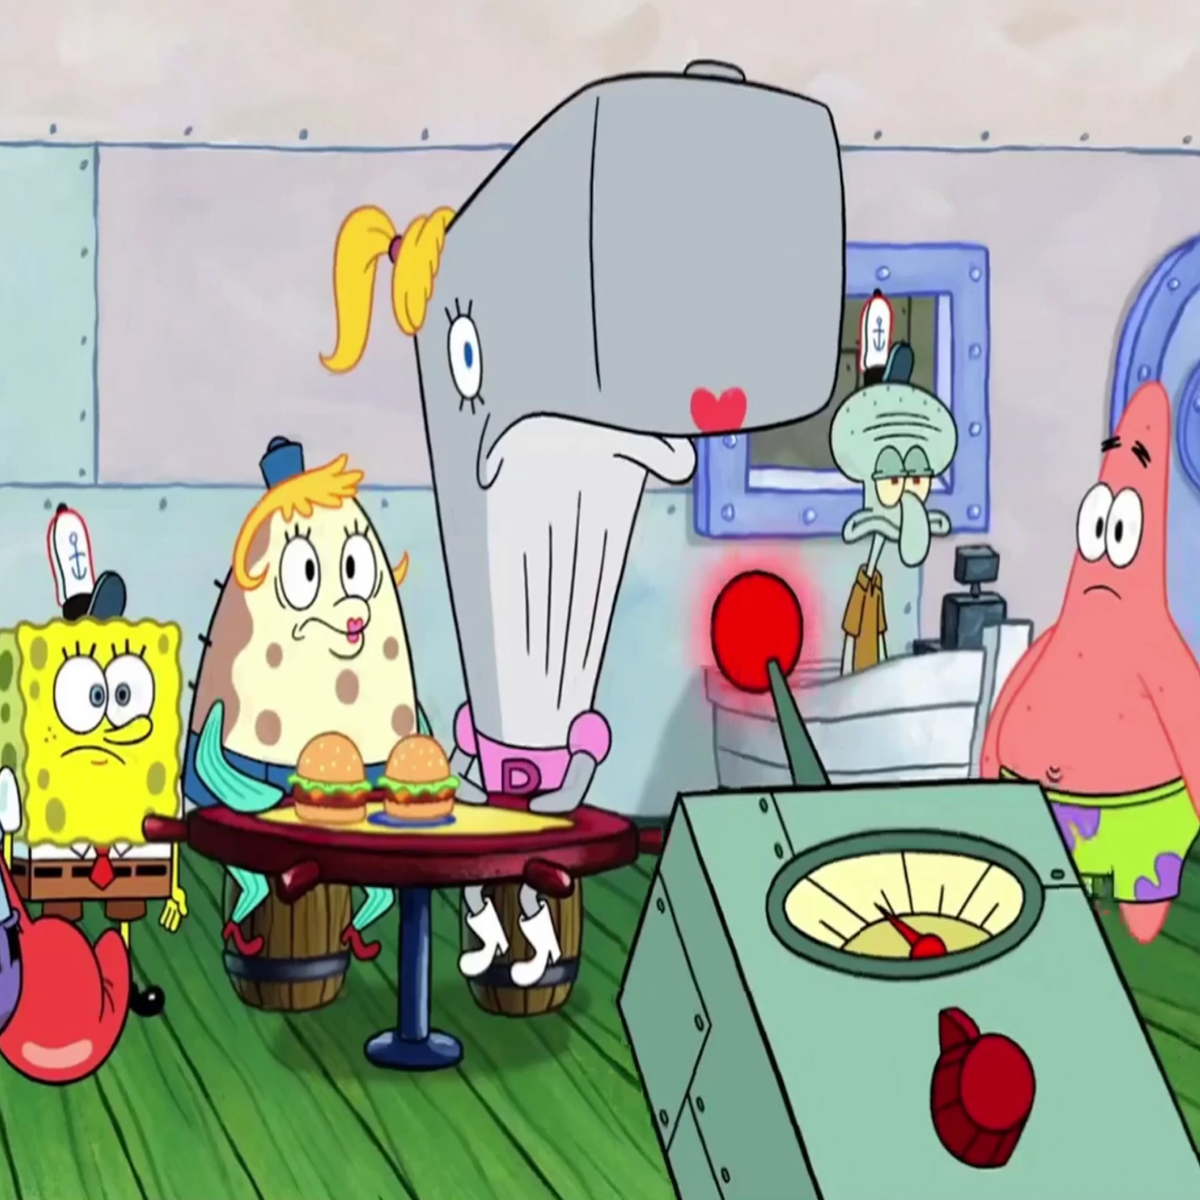 Spongebob Squarepants: Virus-themed episode pulled from air amid